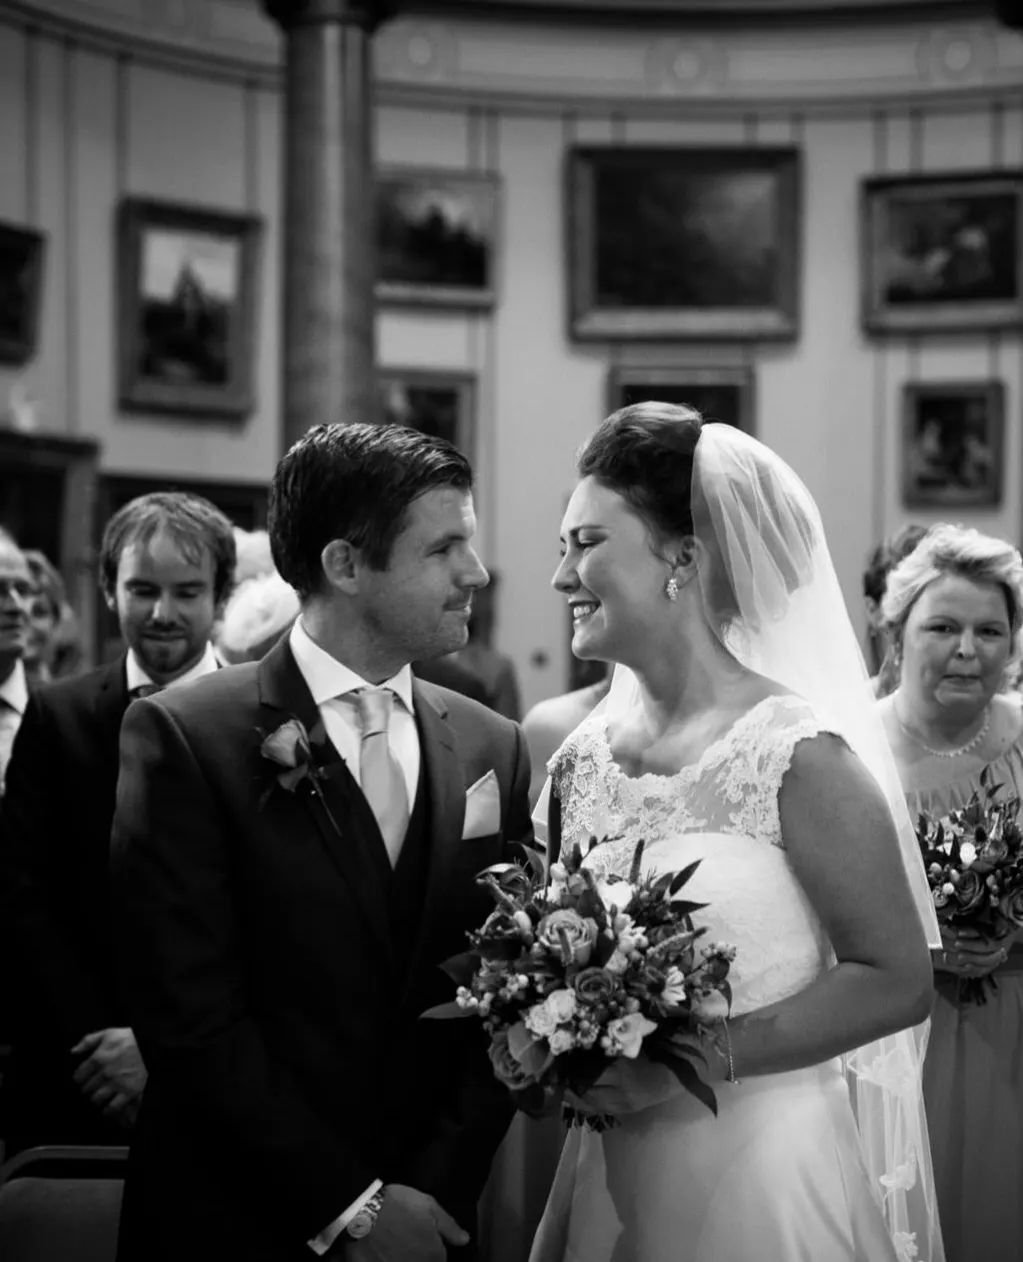 Joanna &amp; James chose the Picture Gallery @paxton_house as the setting for their beautiful and intimate wedding ceremony.

#paxtonhouse
#blackandwhiteweddingphotography
#weddingceremony
#scottishborderswedding
#naturalweddingphotography